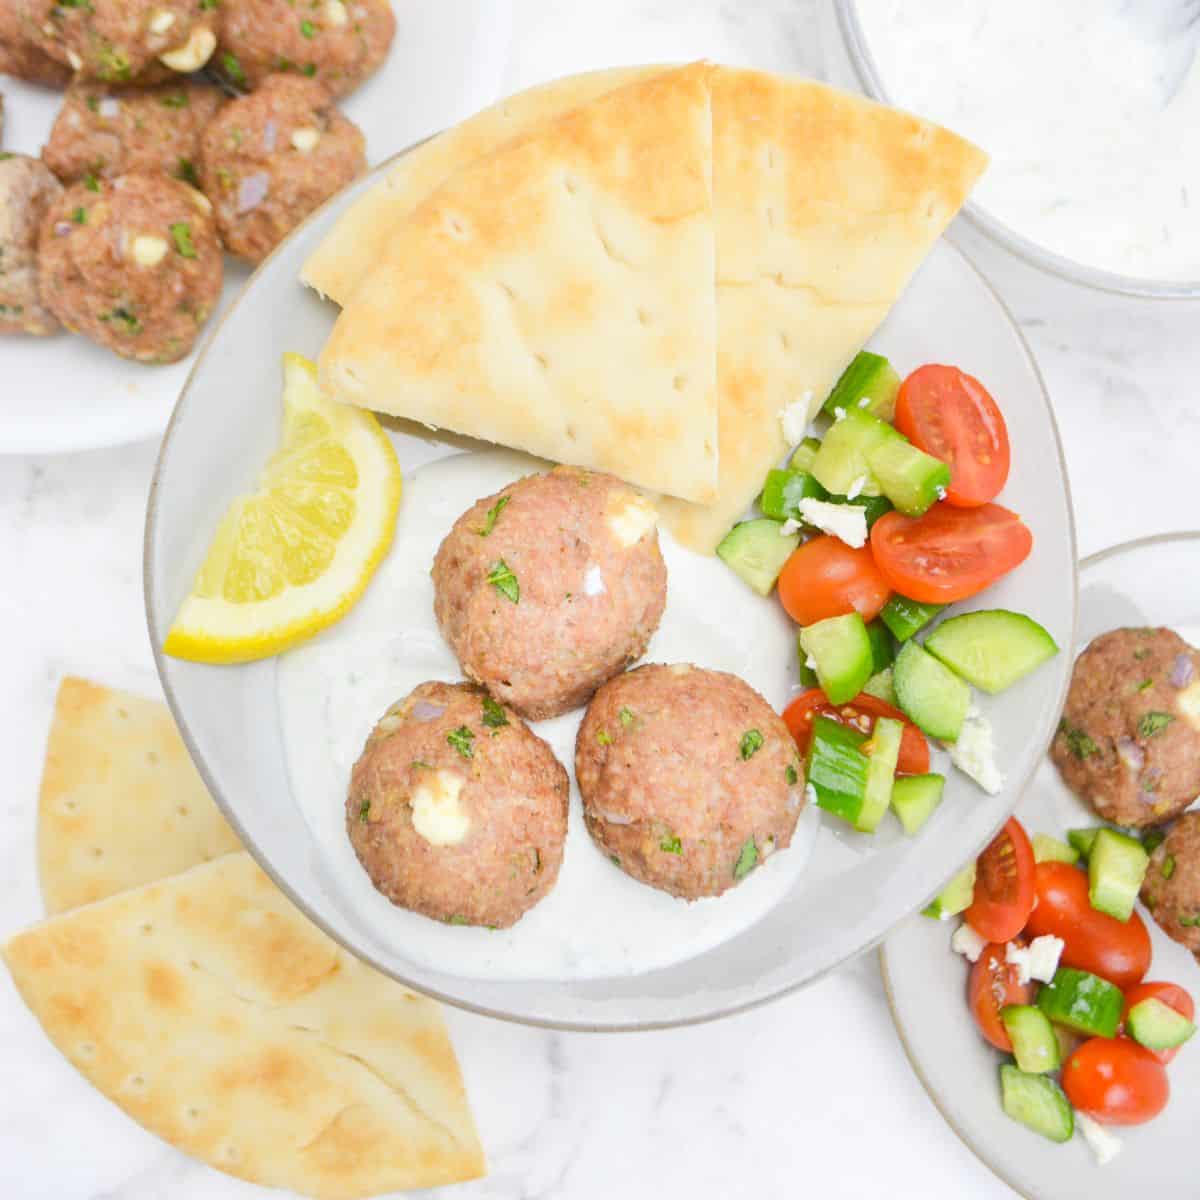 An overhead view of a plate filled with baked meatballs sitting in a spoonful of tzatziki sauce. To the side is a lemon slice, pita, and a cucumber and tomato salad. In the background is an additional plate with the same ingredients, more pita and leftover meatballs.